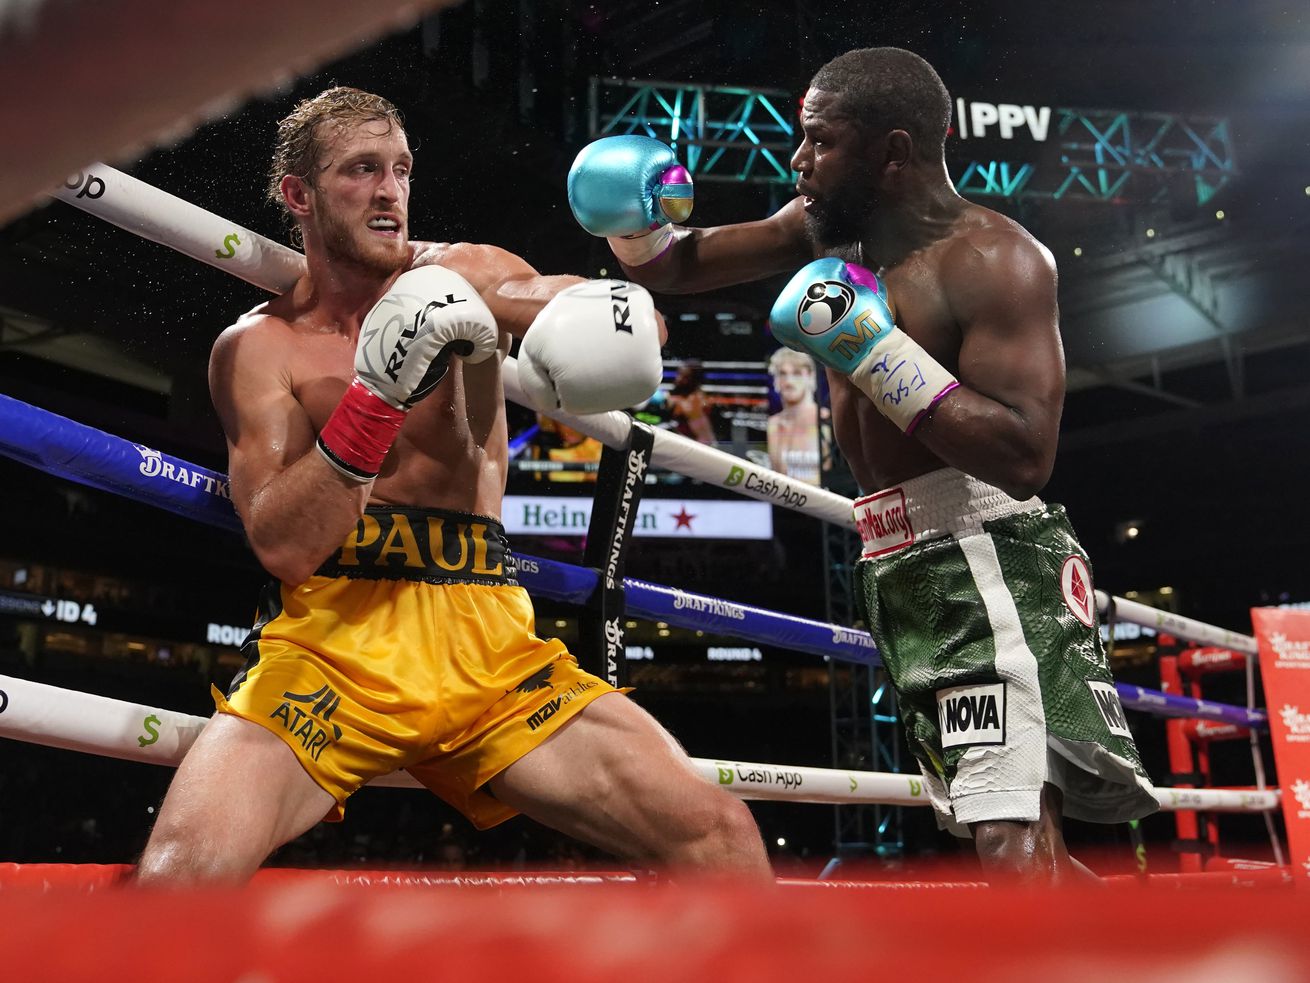 Floyd Mayweather, right, throws a punch at Logan Paul, left, during an exhibition boxing match at Hard Rock Stadium in Miami Gardens, Florida, on Sunday.